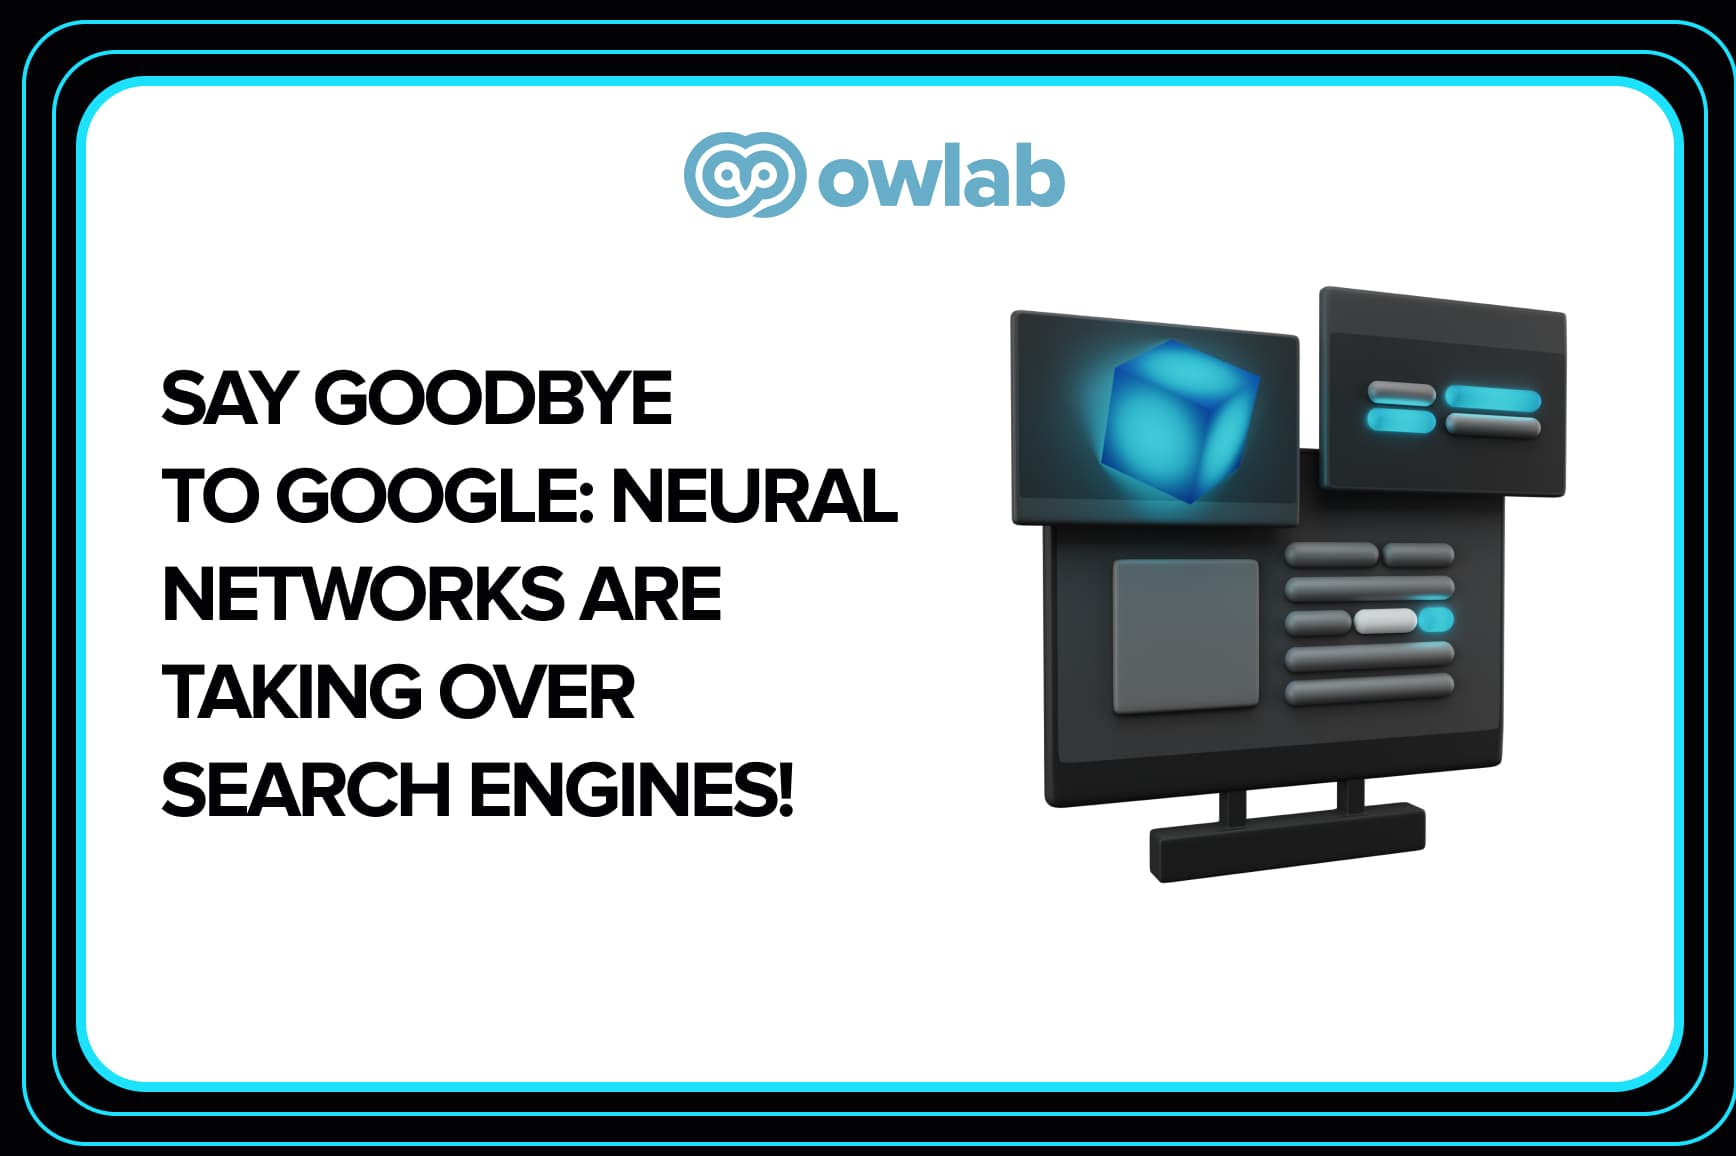 Say Goodbye to Google: Neural Networks are Taking Over Search Engines!